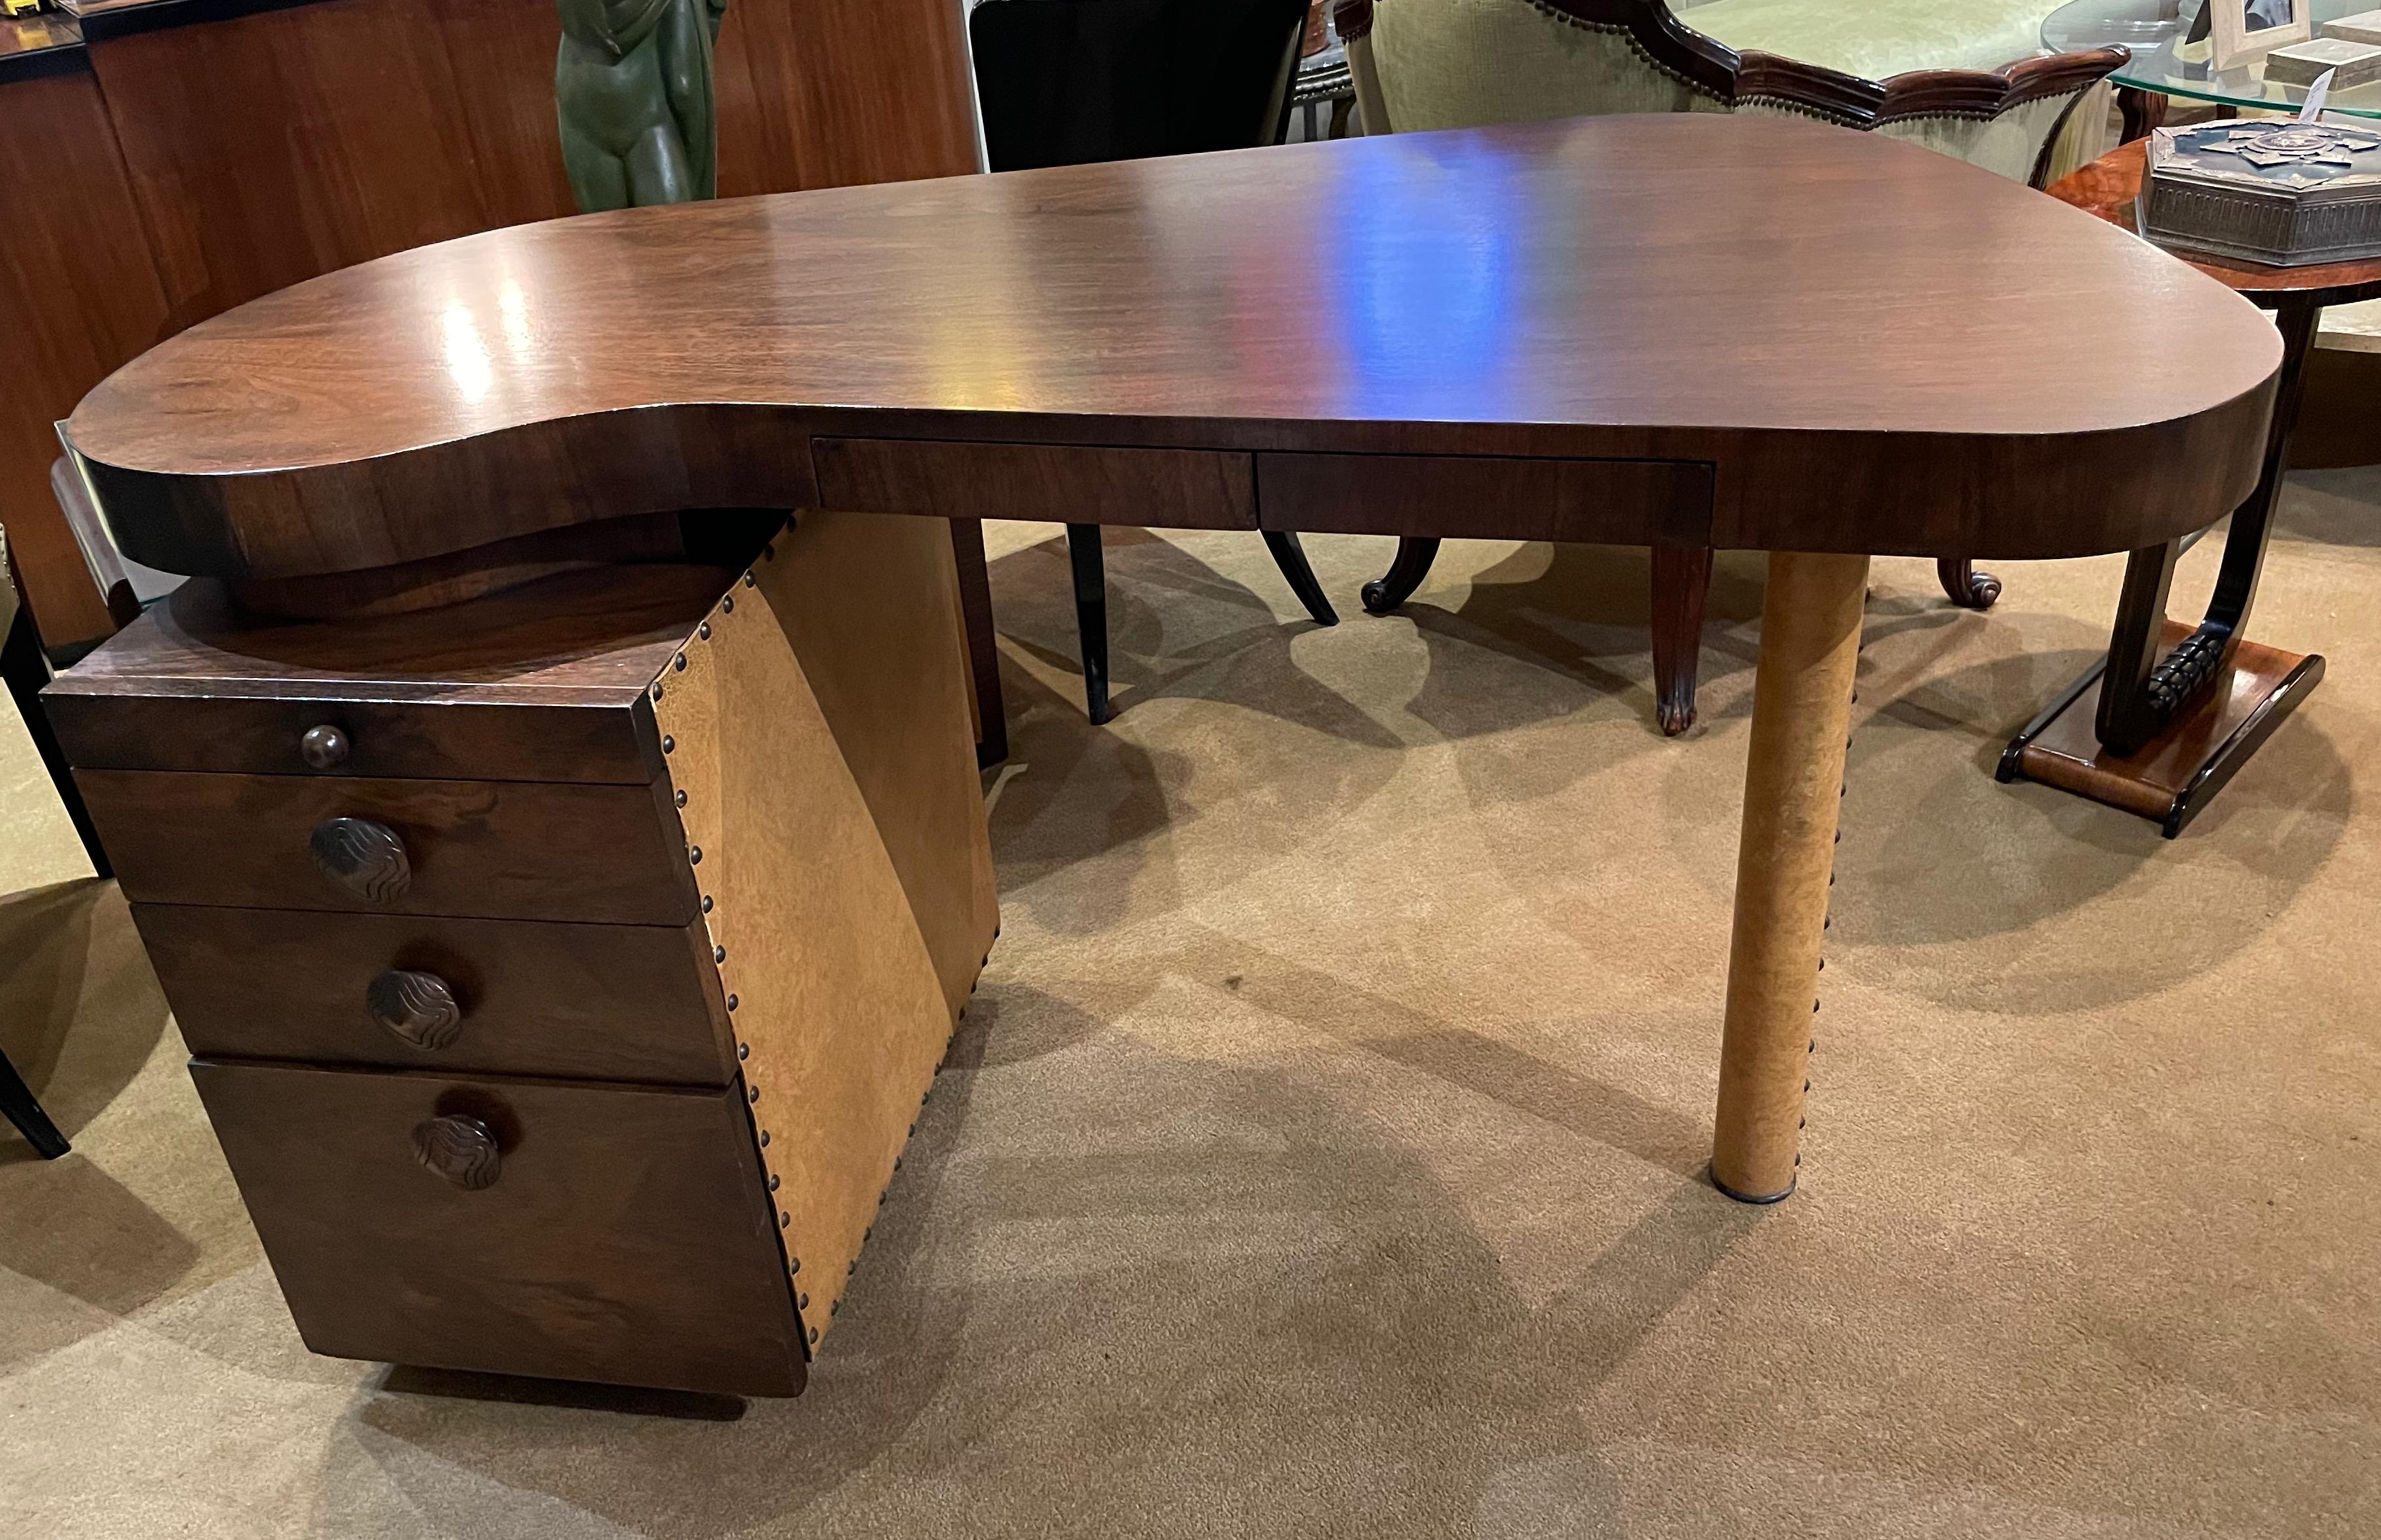 This Gilbert Rohde paldao desk was manufactured between 1935-1940 by the Herman Miller Company. It is in original condition showing only the very lightest signs of wear. It still has the original leatherette covering on the legs. This stylized desk